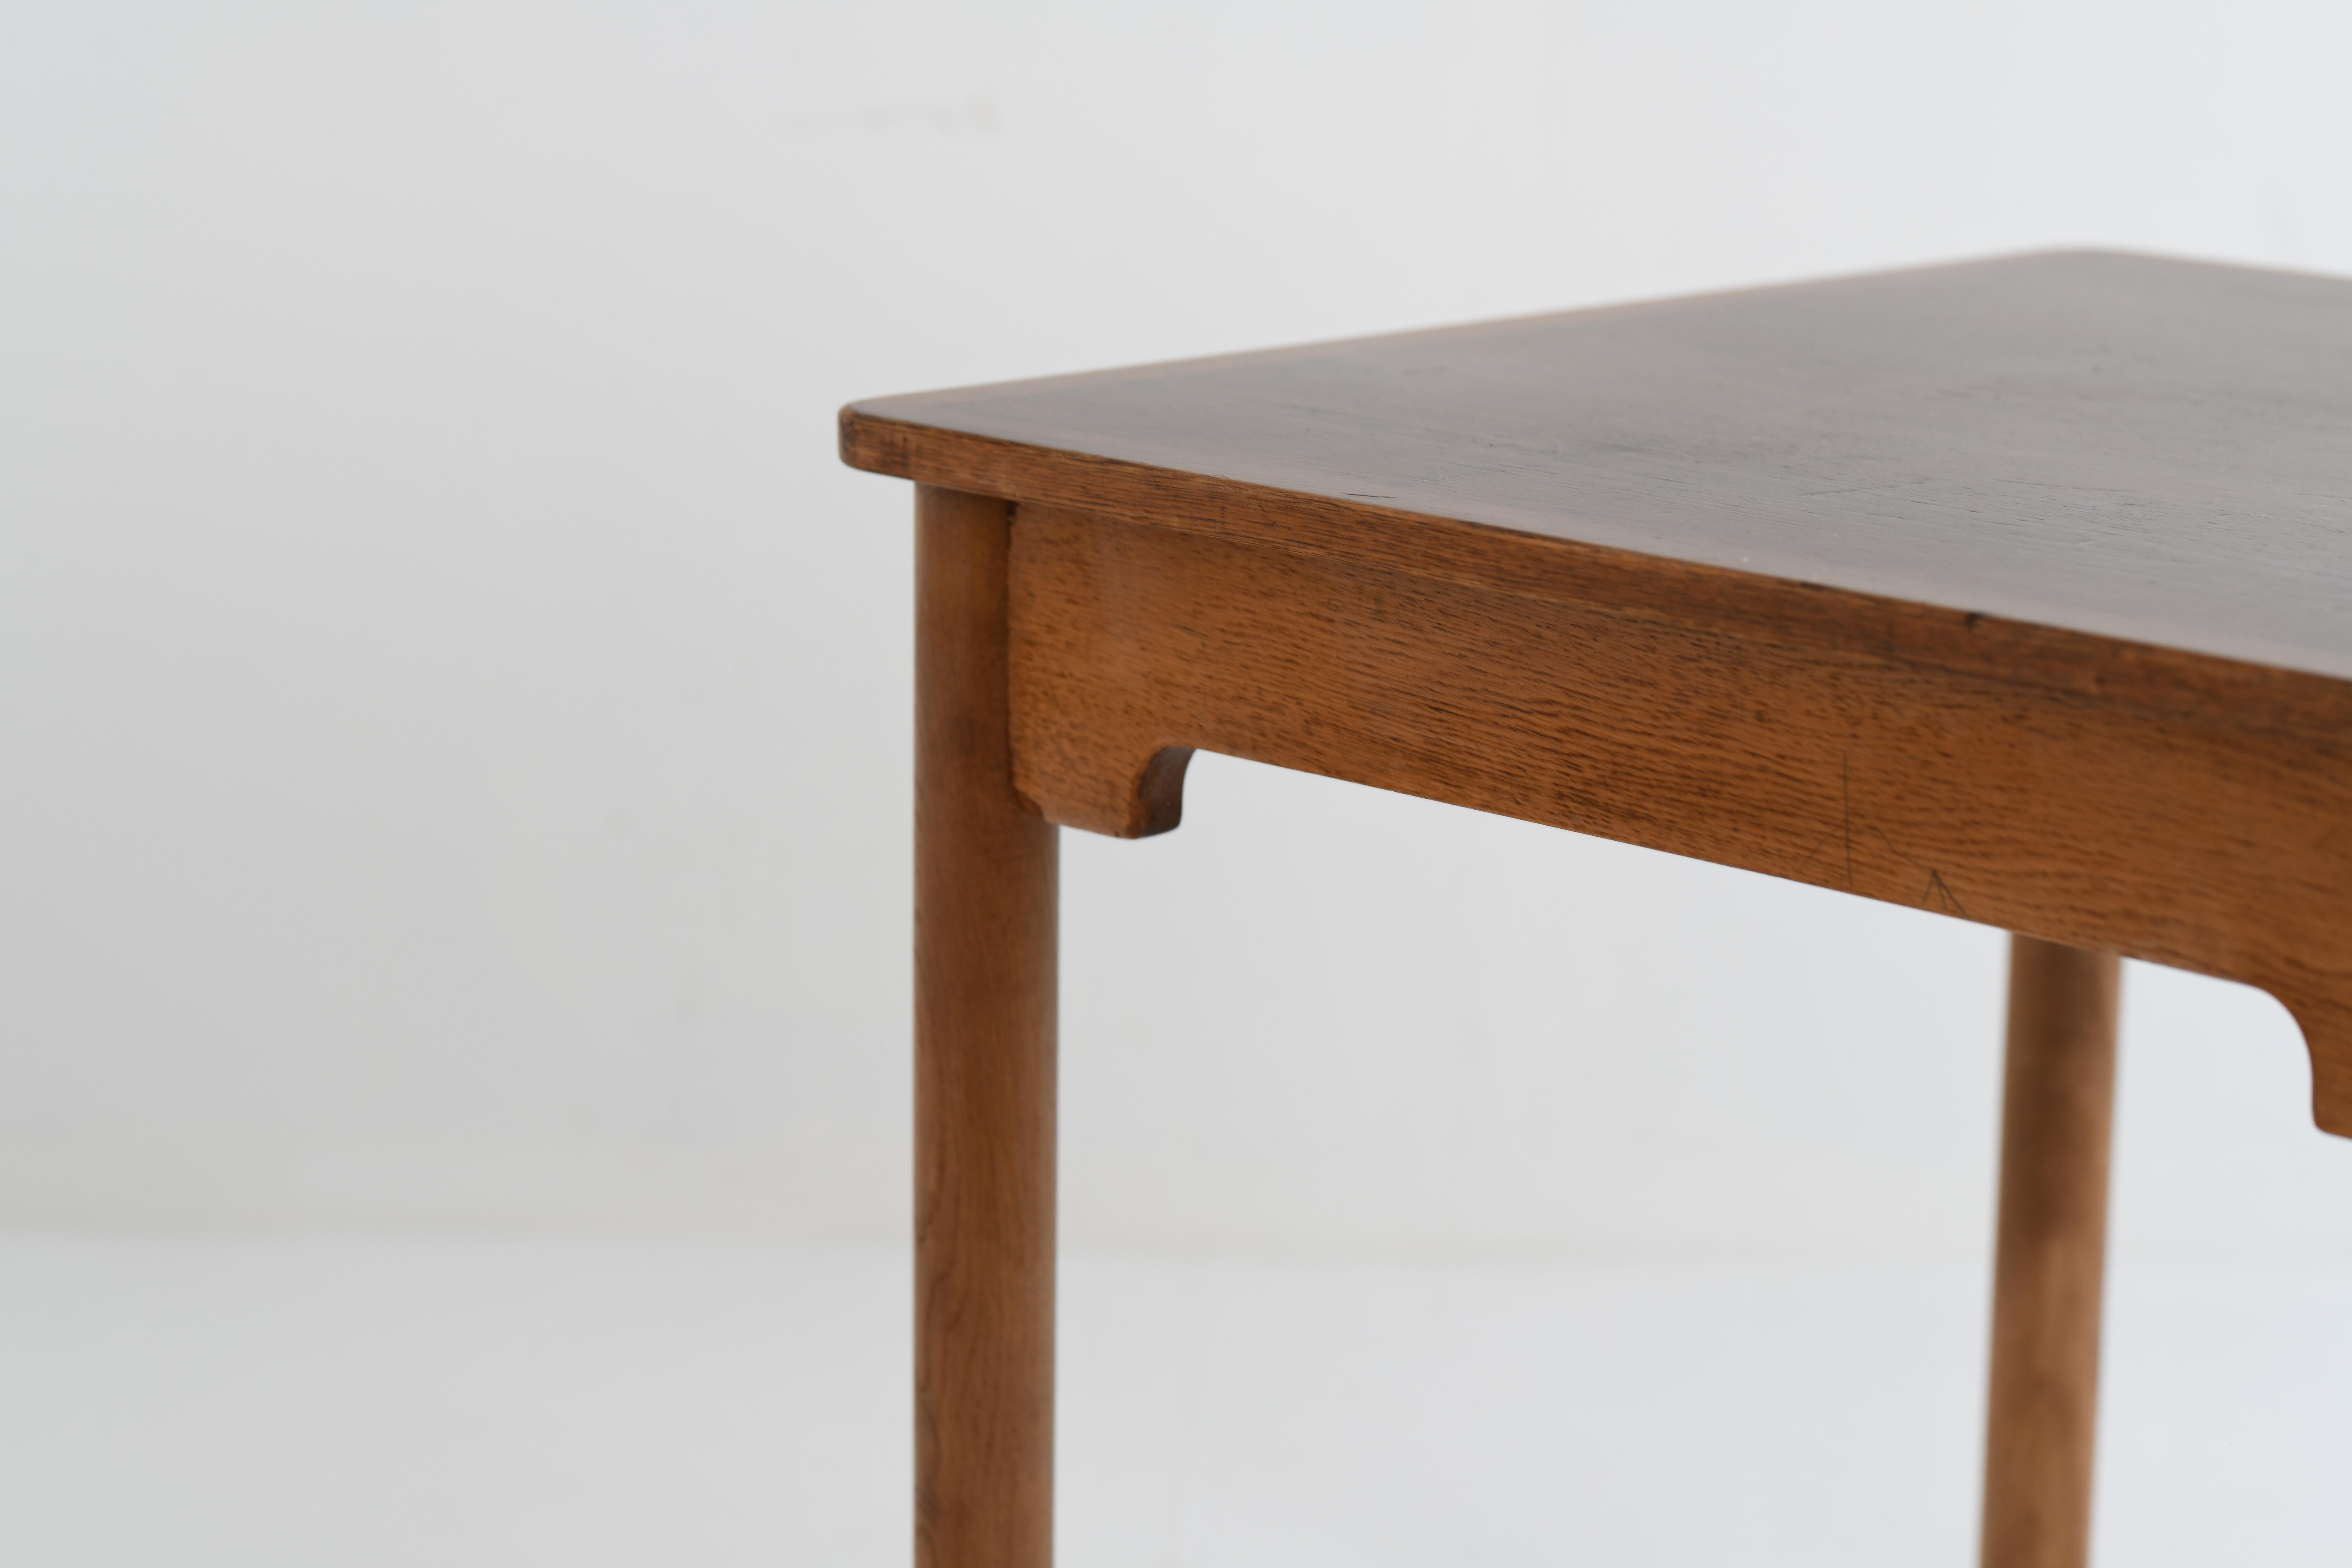 This Börge Mogensen Designed table was part of the Öresund series number 181/182 that AB Karl Andersson & Soner produced in very very small numbers, dating from the 1960s It's made of Oak with turned legs that are for easy removal. Very good patina